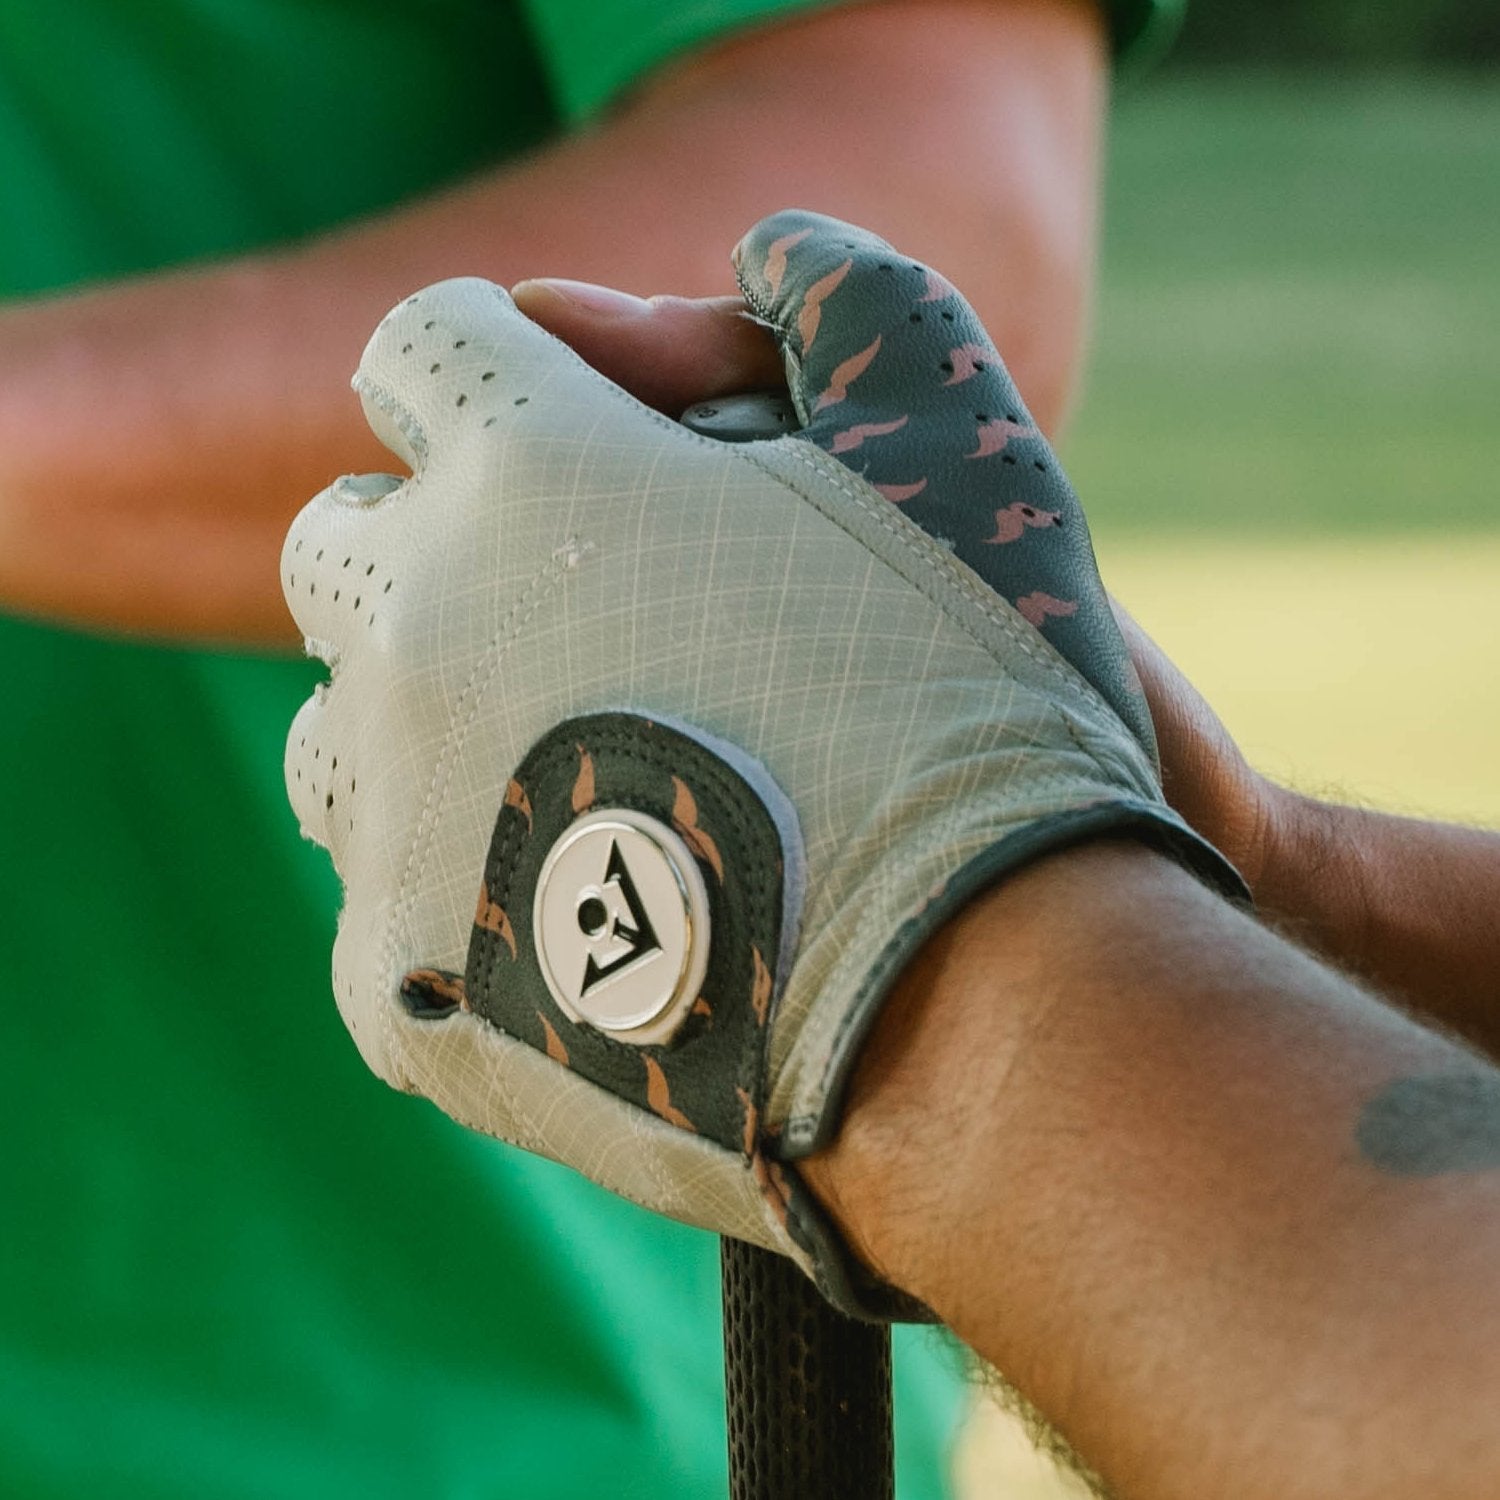 Men's charcoal golf glove with mustache pattern close up, holding the bottom of a golf club with other golfers in the background blurred, golf glove has a ball marker with VivanTee Logo in white and black.